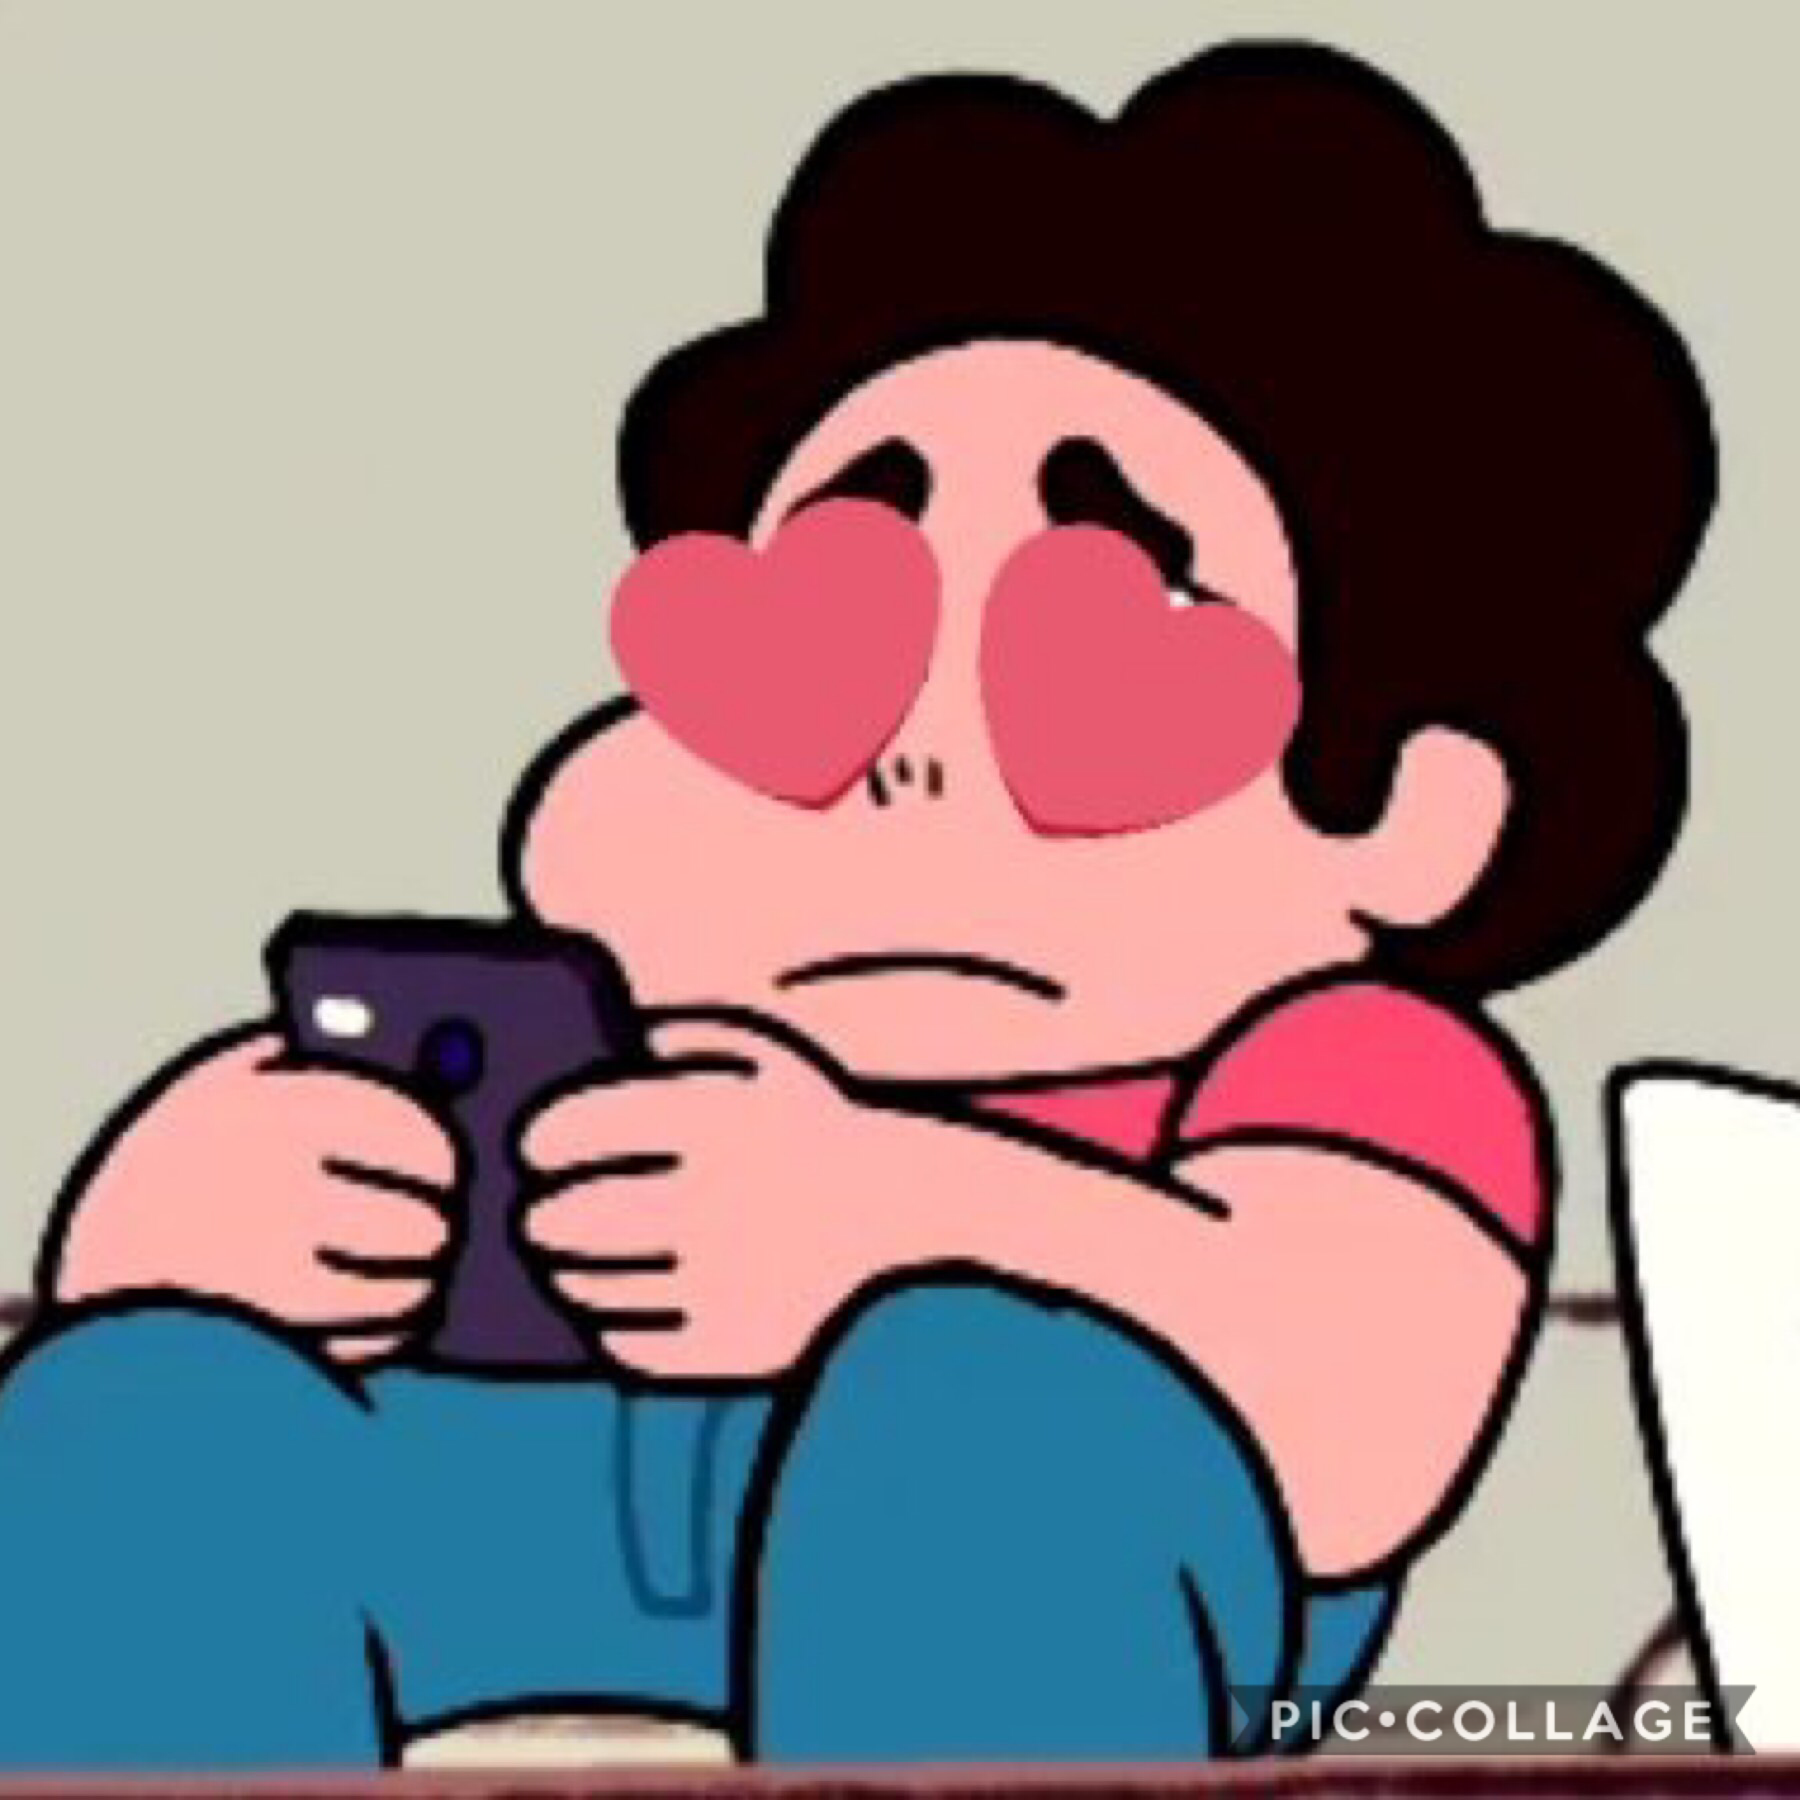 me looking at your posts and reading your comments cuz i love and appreciate you all smmmmm💜💕💝💞💜💕